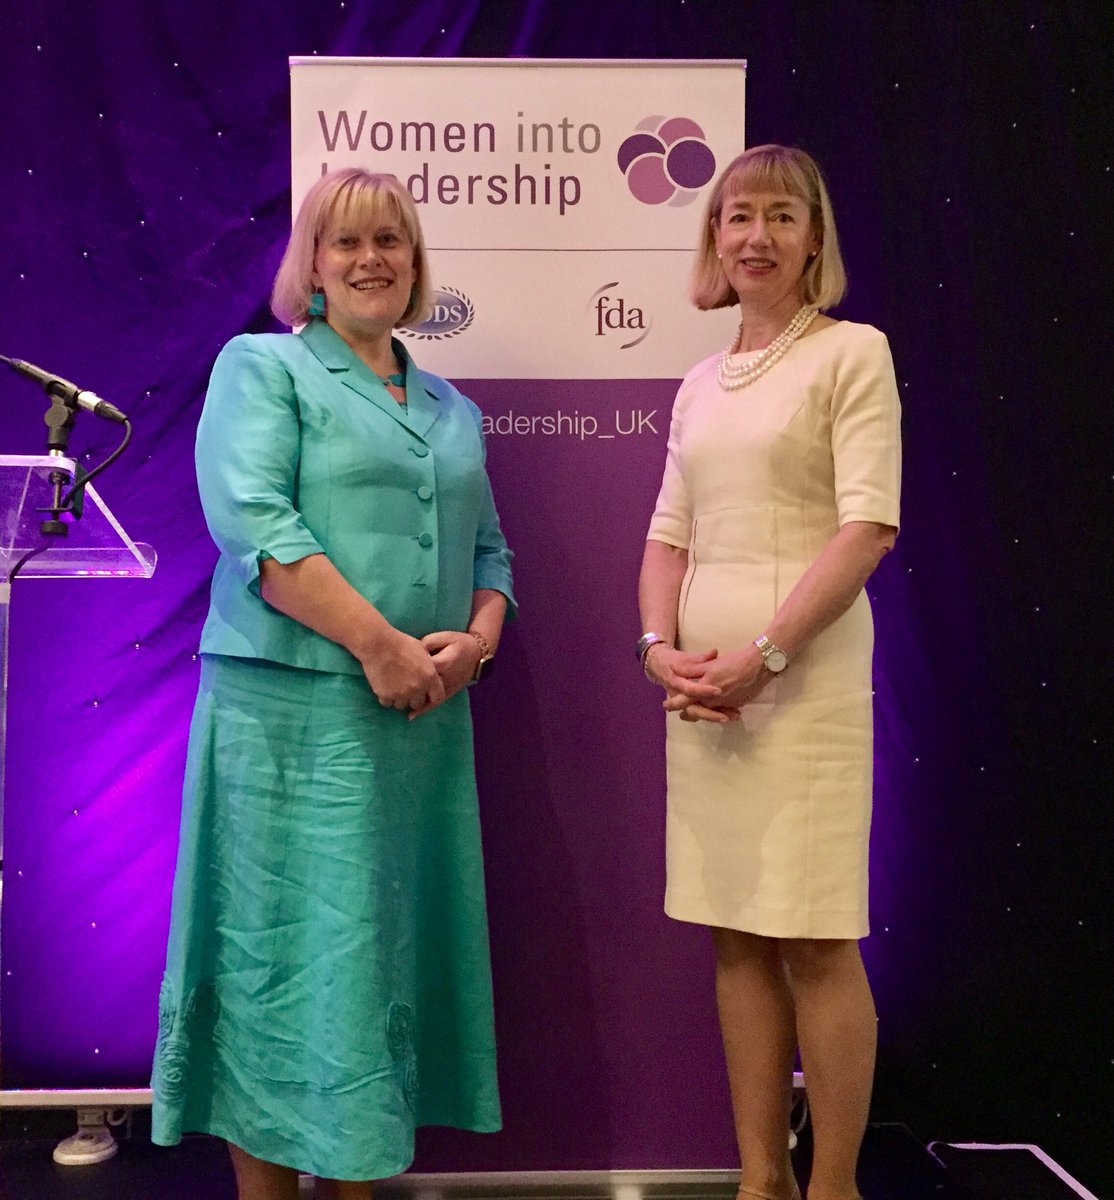 Delighted to be at my fourth #WomenIntoLeadership Conference - key event for those who want to see #leadership opportunities for women enhanced #aspiretolead #talent #opportunity #WiL19